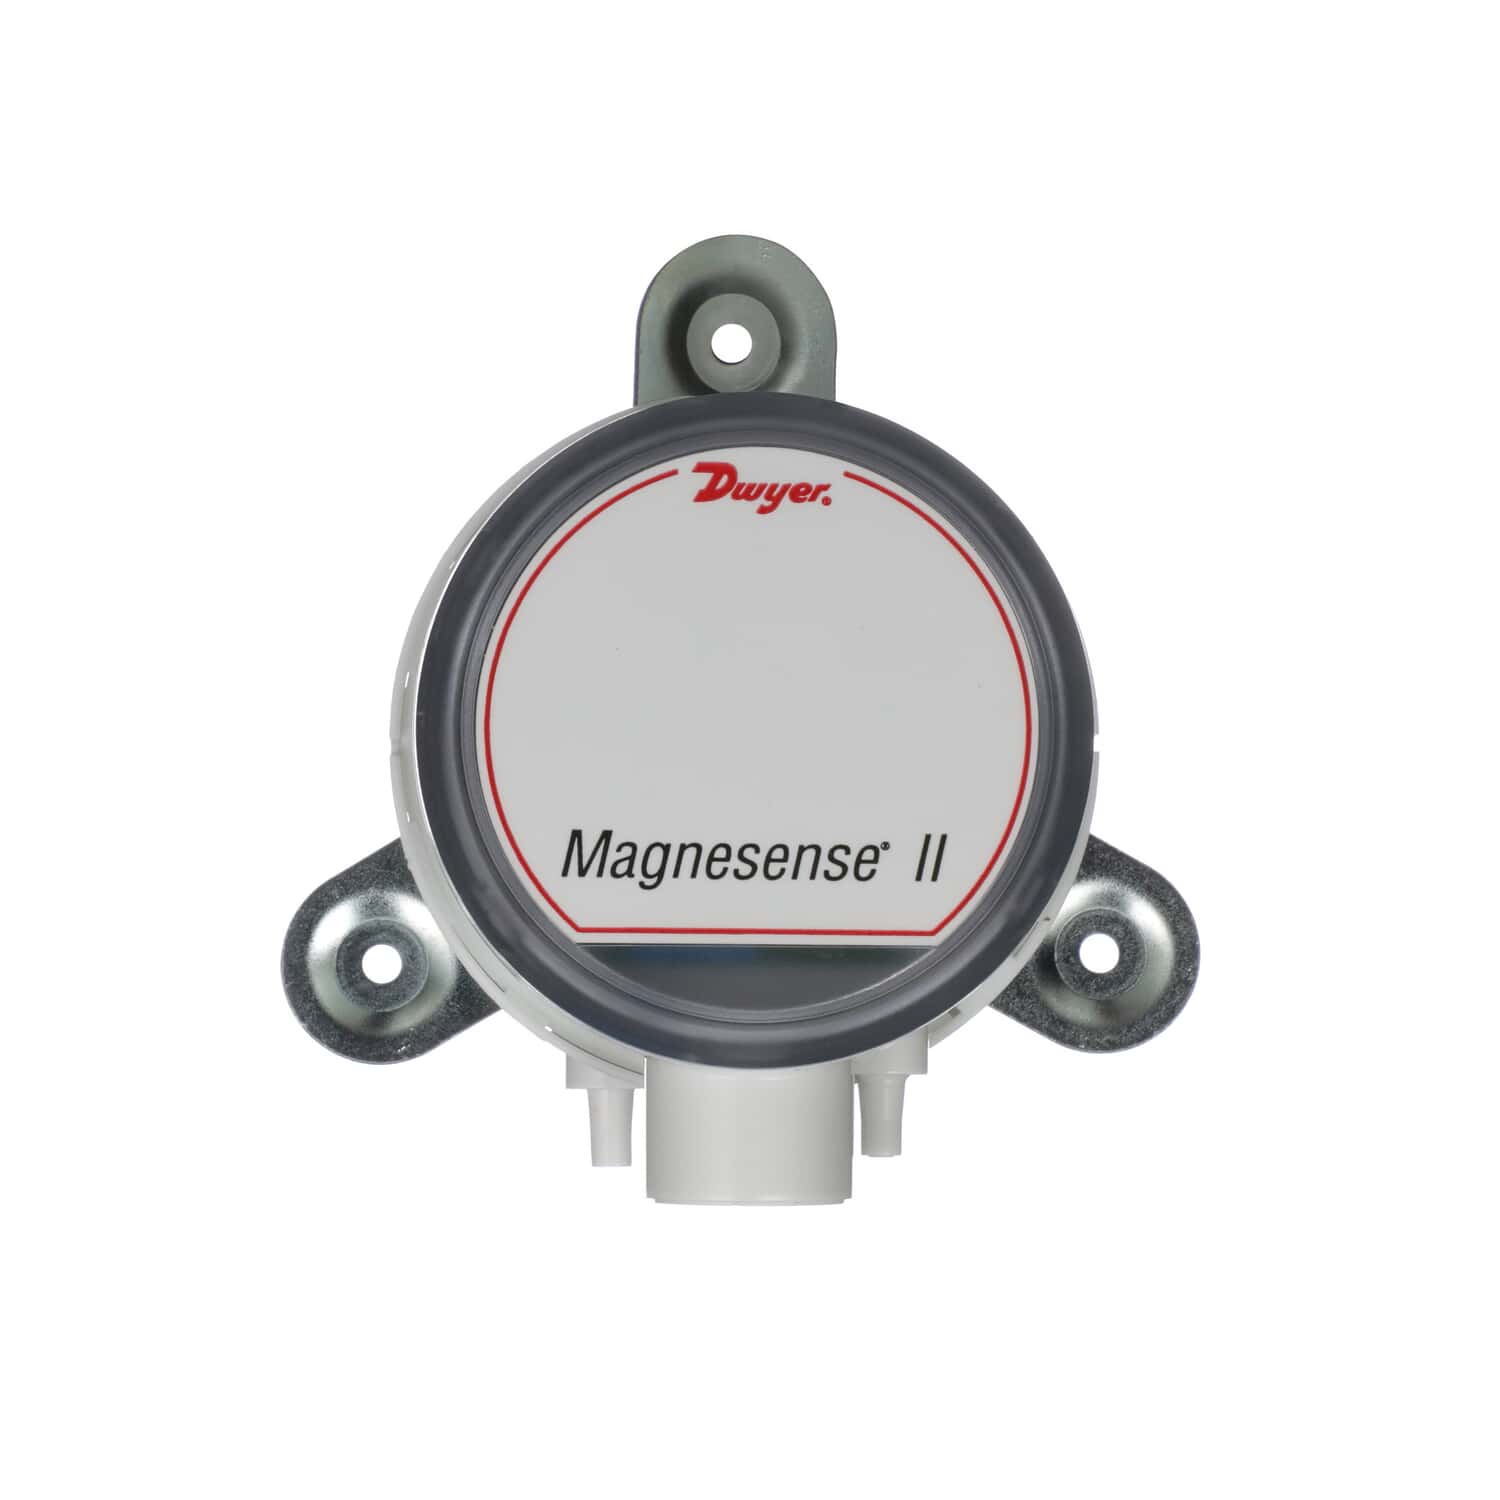 Series Ms2 Magnesense Ii Differential Pressure Transmitter Which Combines The Proven Stable Piezo Technology And Versatility Of The Series Ms To Reduce Installation Time Dwyer Instruments